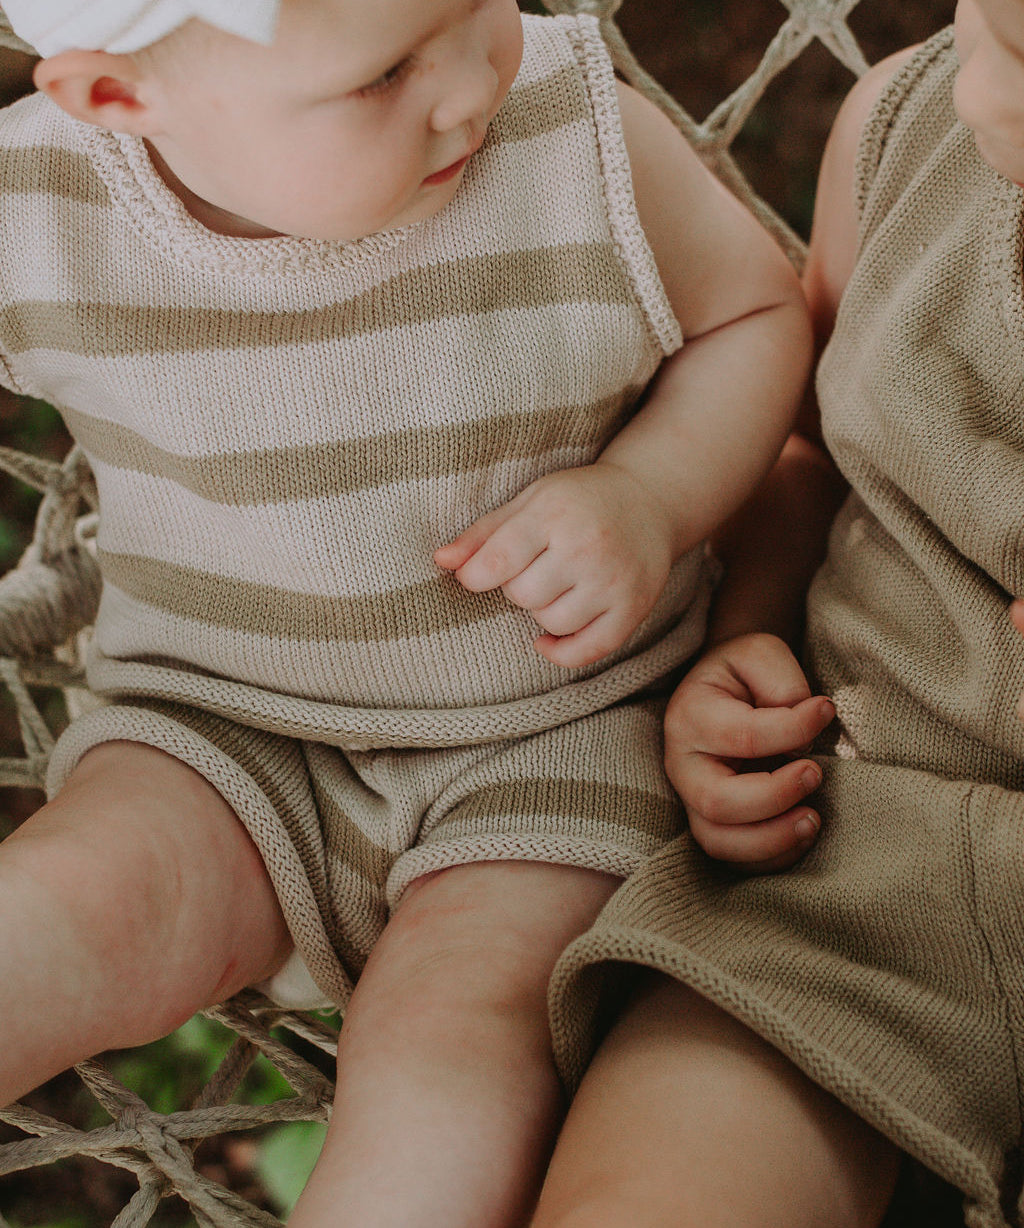 Winnie + Crew comfortable and stylish matching sets for babies and toddlers in modern neutral colors